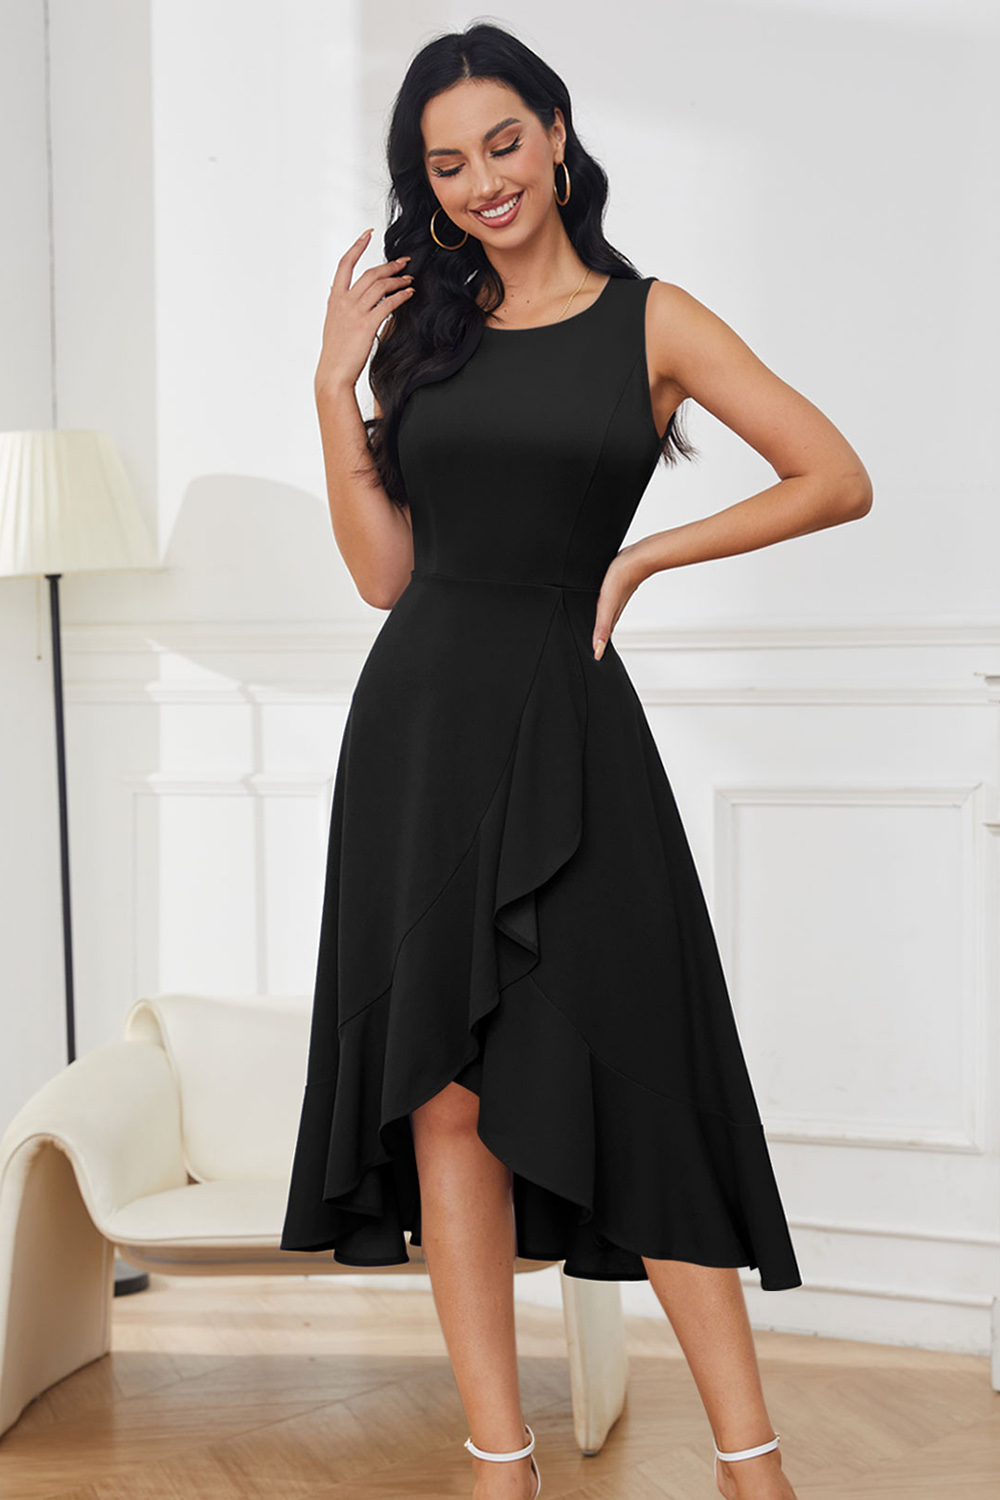 Black Cocktail Party Dress Formal Church Dress for Wedding Guest Fit Flare Modest Prom Midi Evening Dress